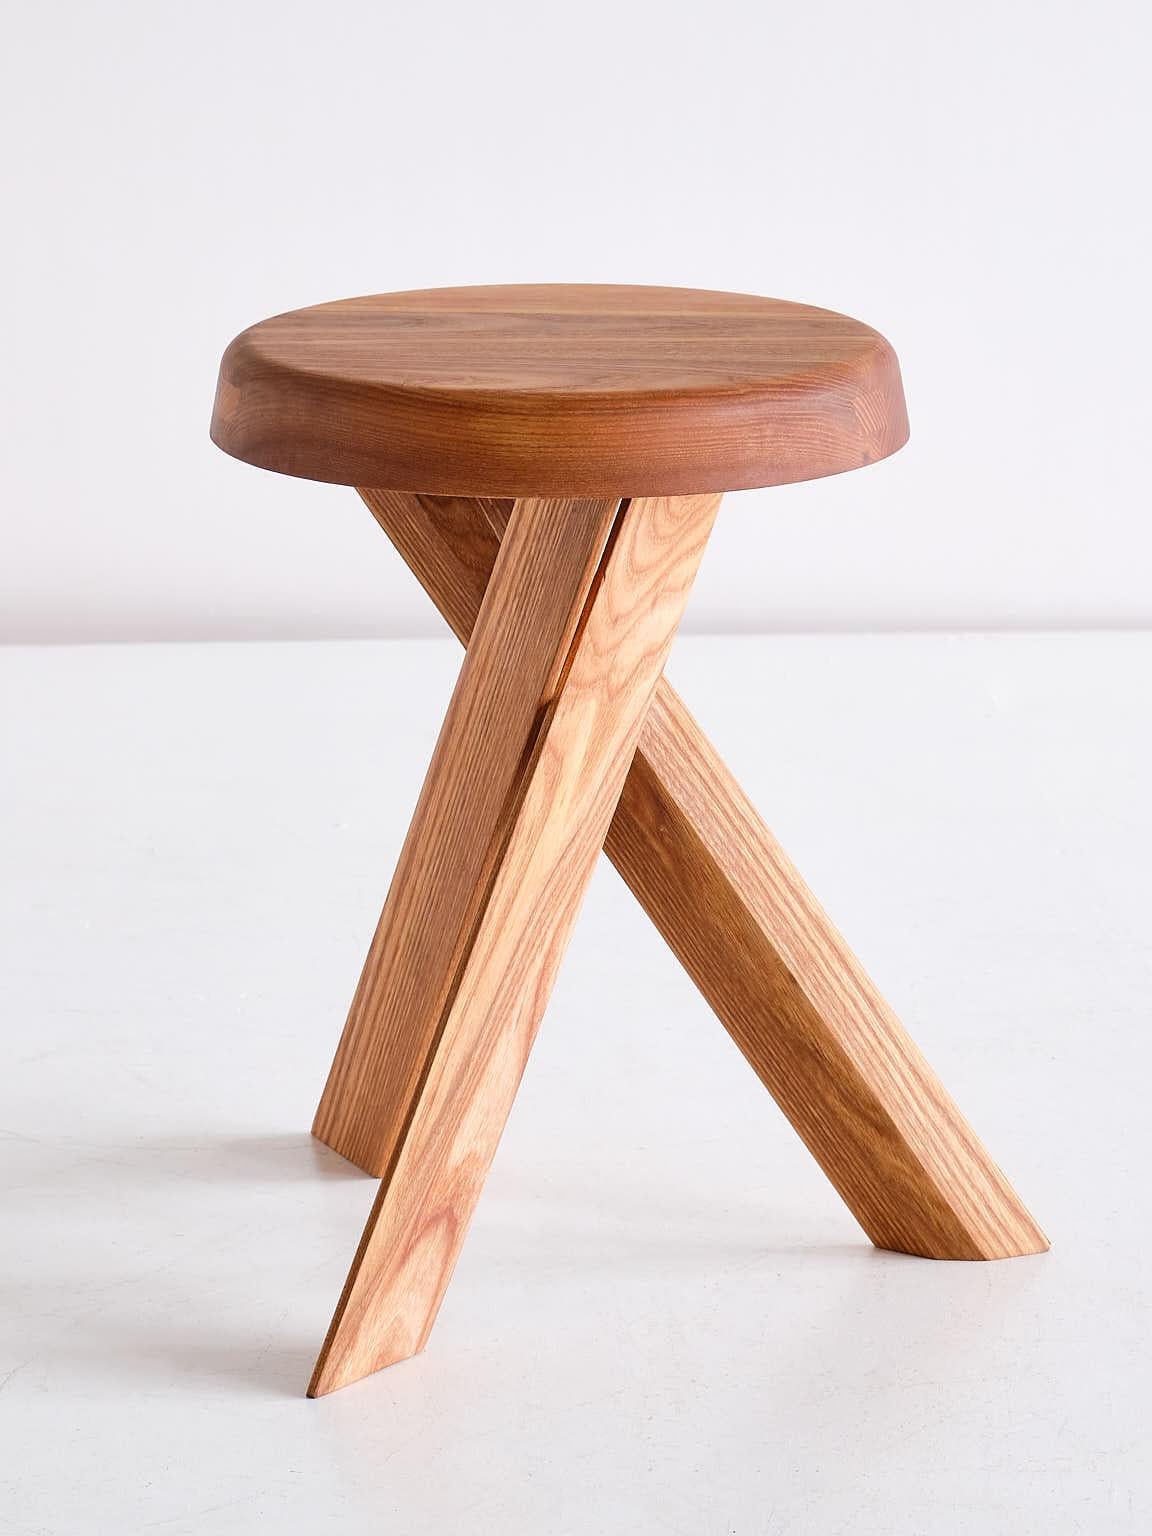 A timeless piece crafted by the artisanal expertise of the Chapo family in Gordes, Southern France. Handcrafted in their traditional workshops using age-old techniques, this stool embodies the essence of authentic craftsmanship and